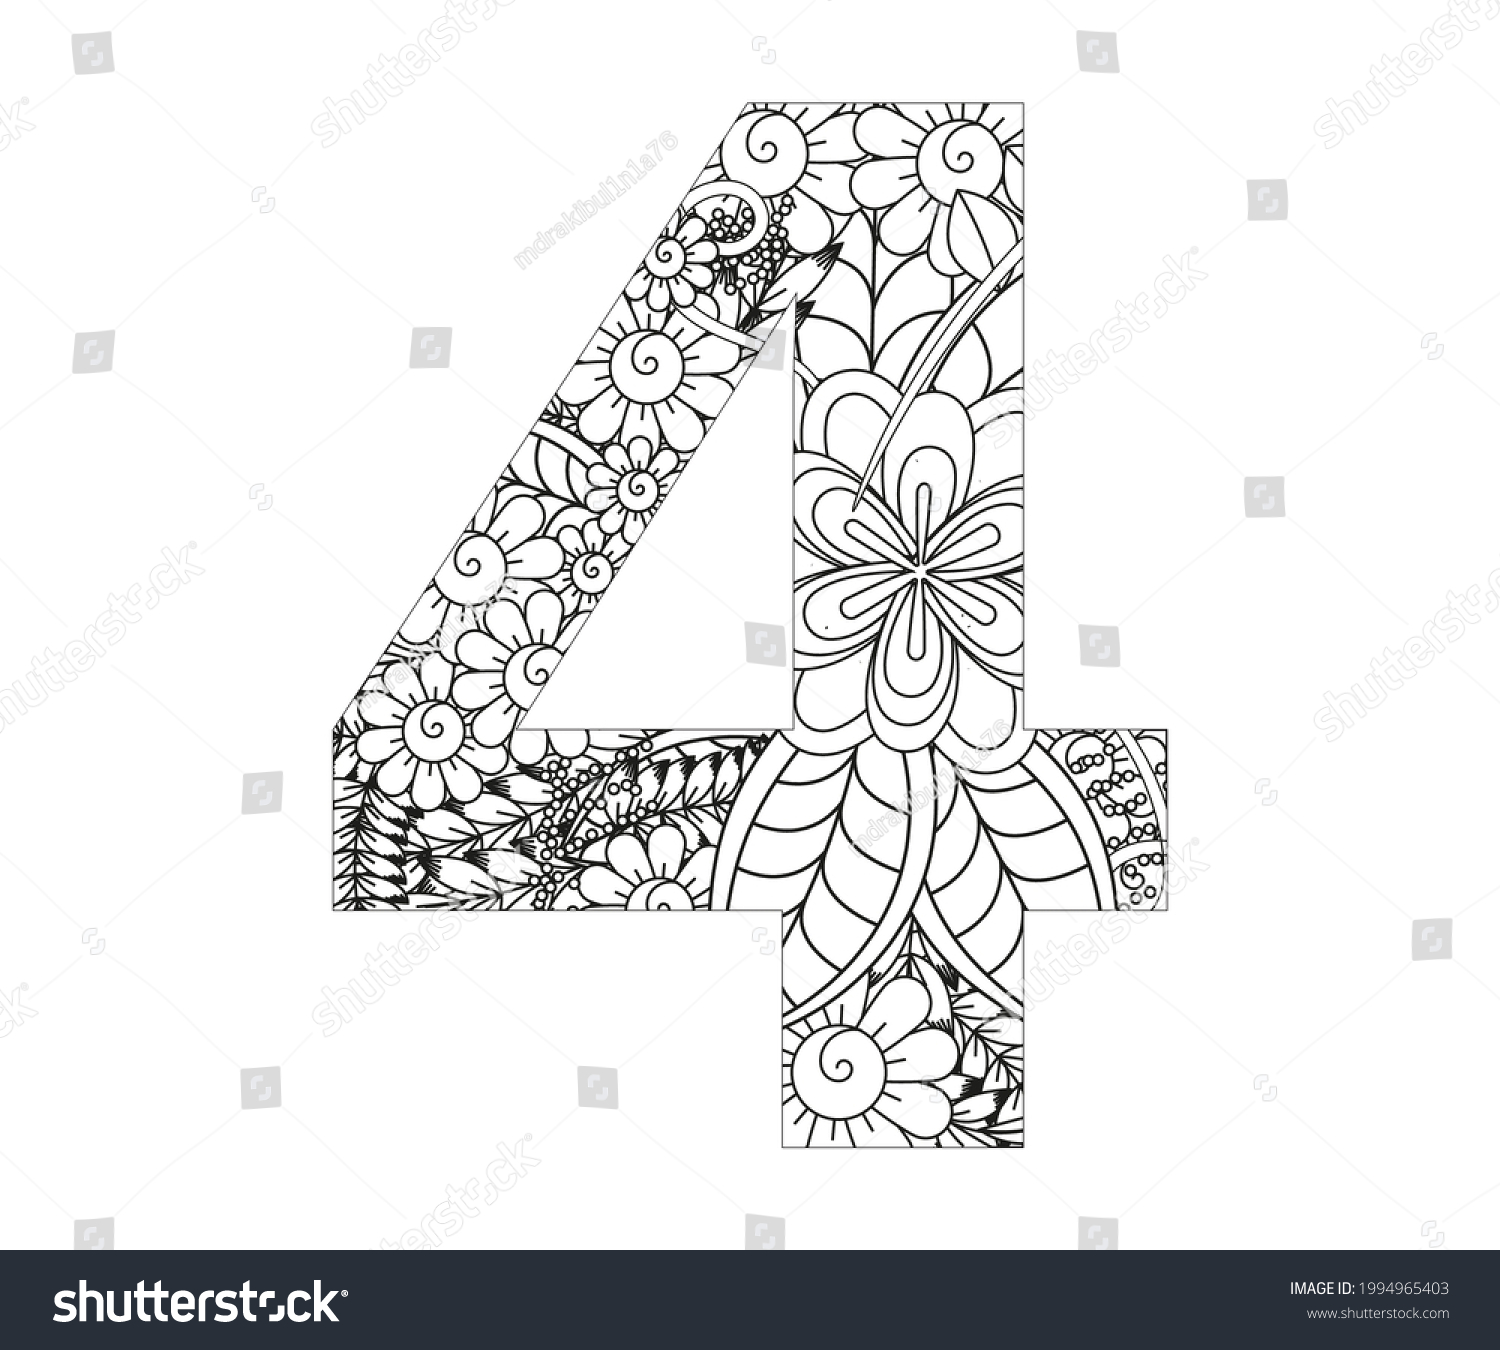 SVG of Adult coloring page with number 4. Ornamental font svg